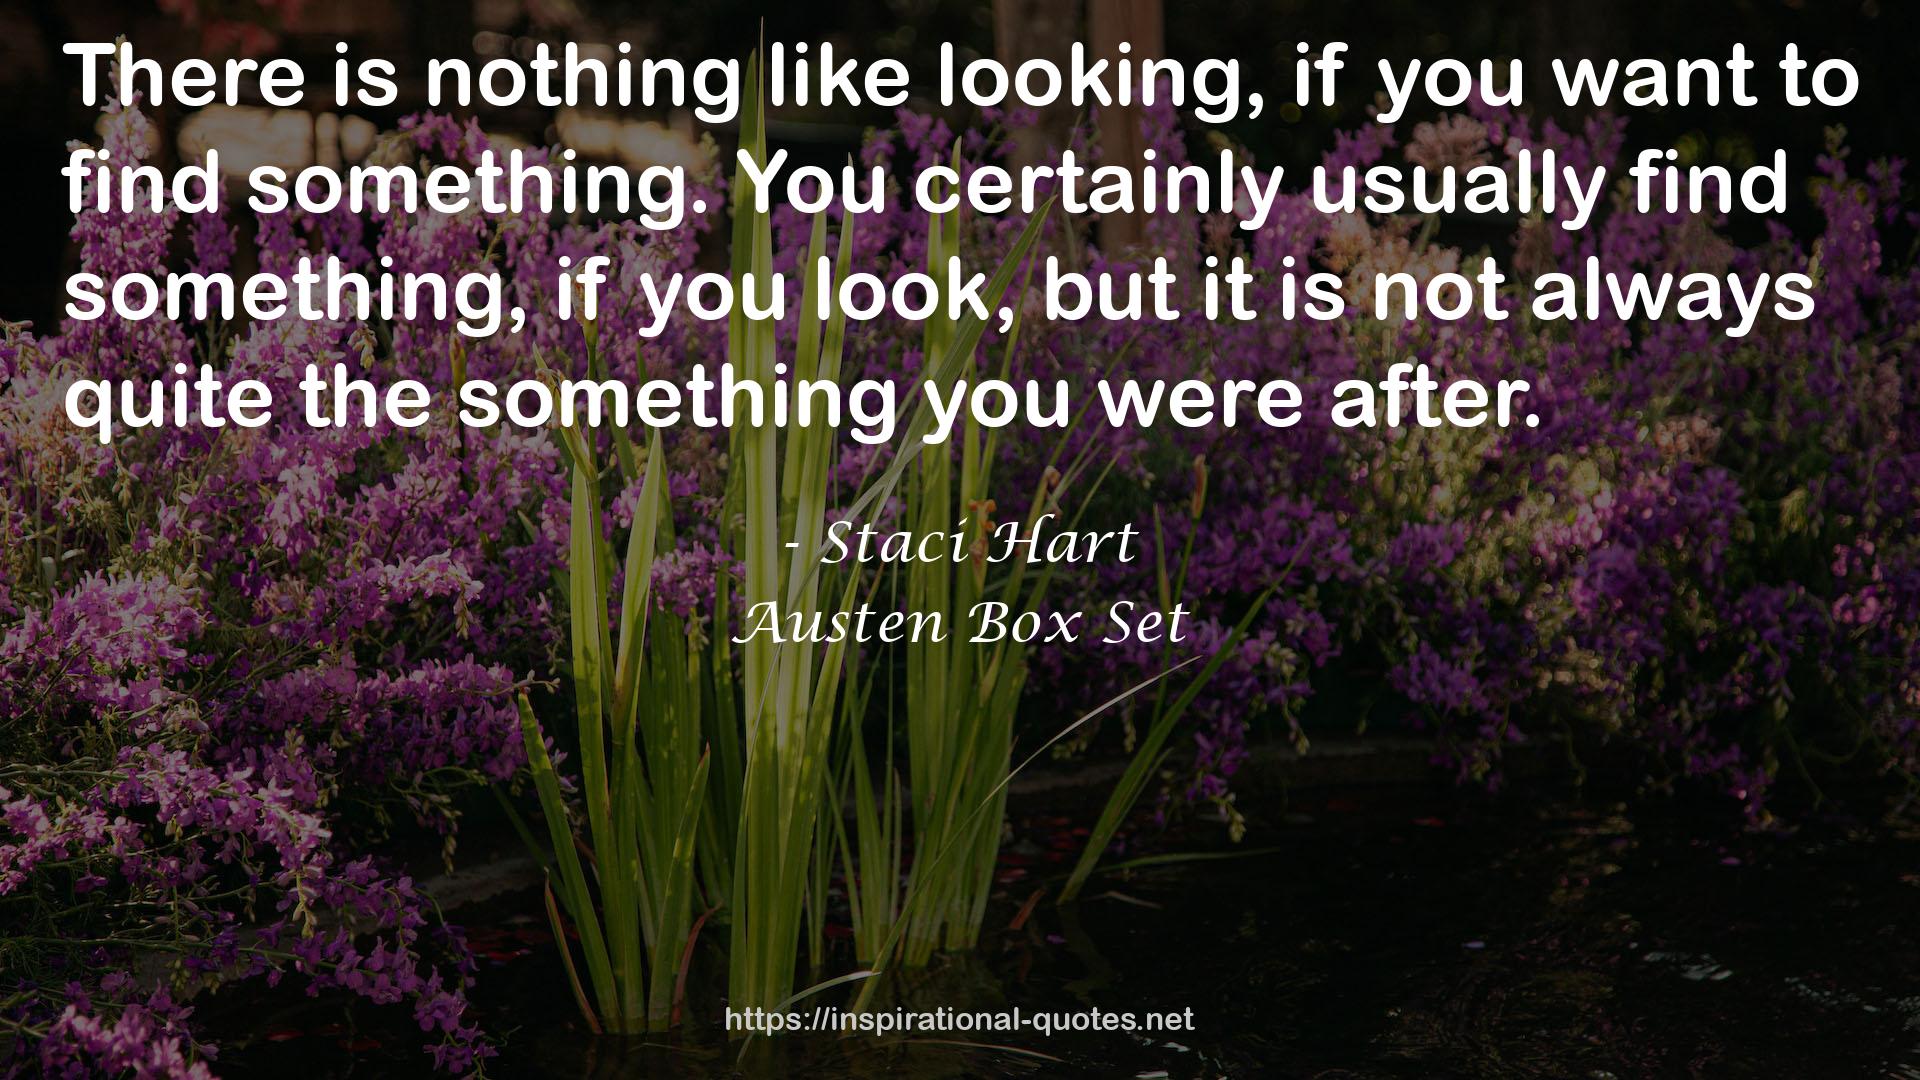 Staci Hart QUOTES